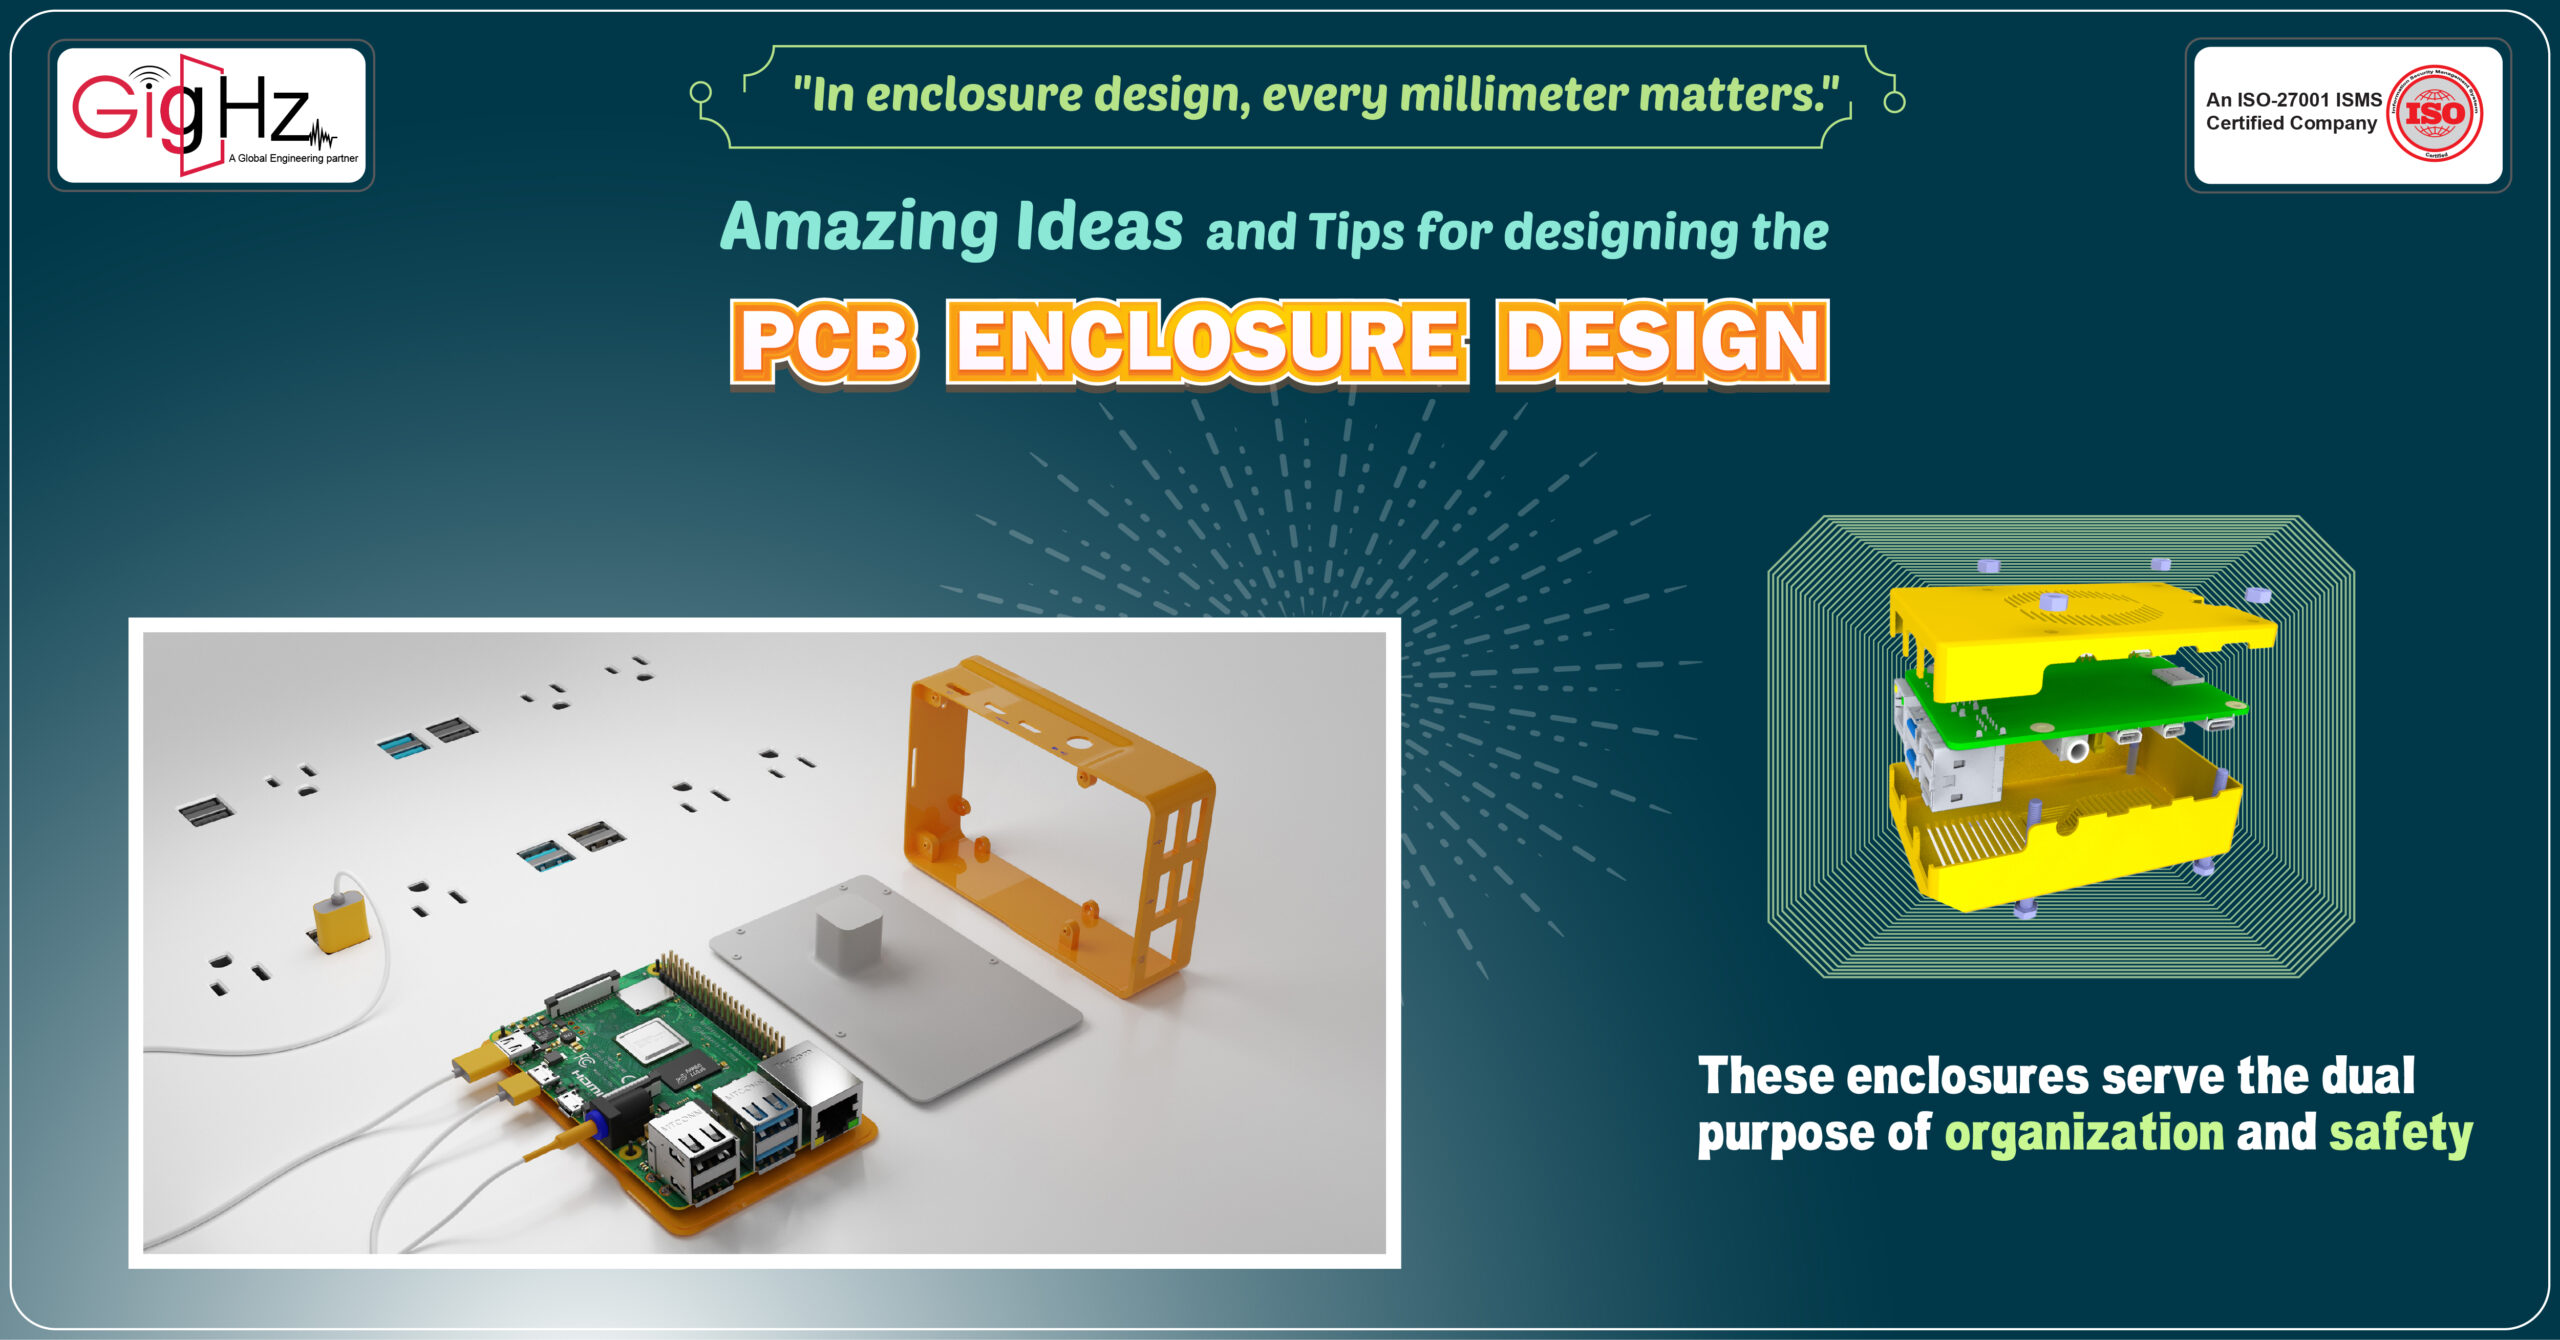 Amazing Ideas and Tips for designing the PCB Enclosure Design